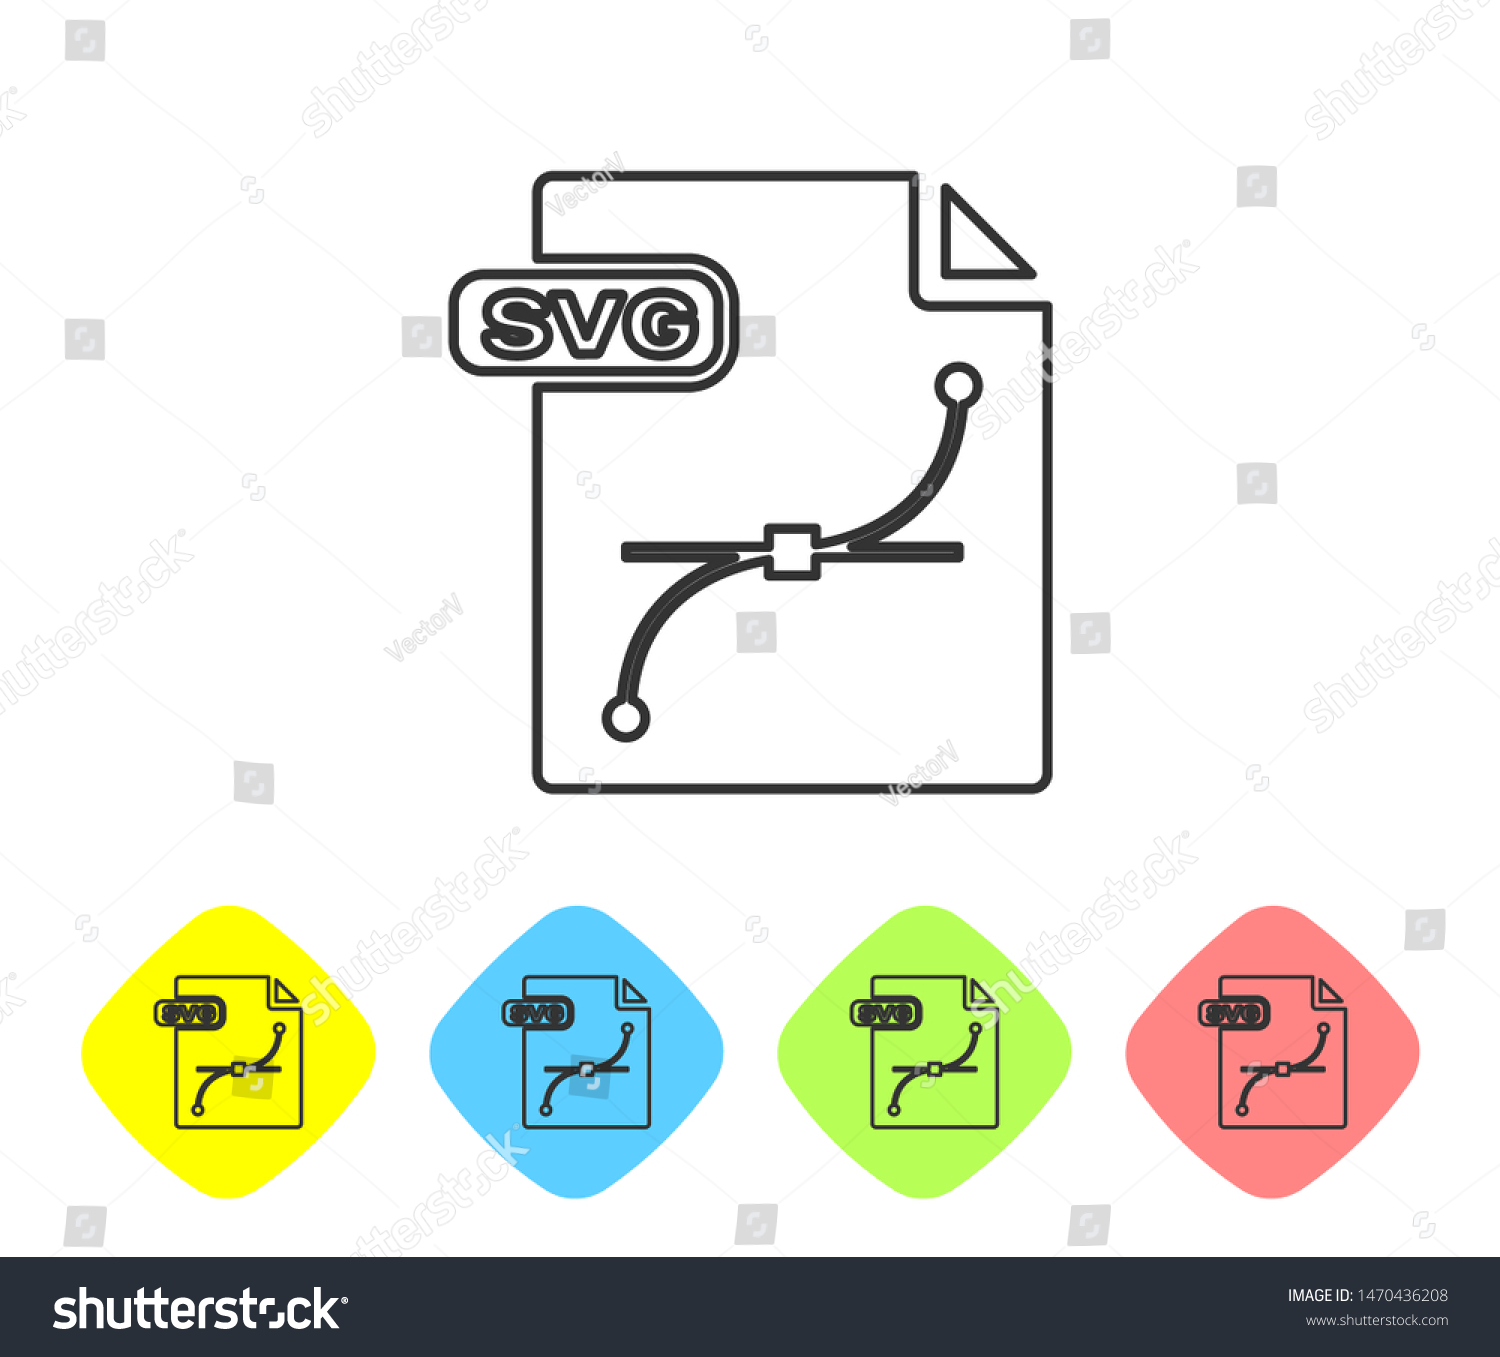 SVG of Grey line SVG file document. Download svg button icon isolated on white background. SVG file symbol. Set icons in color rhombus buttons. Vector Illustration svg